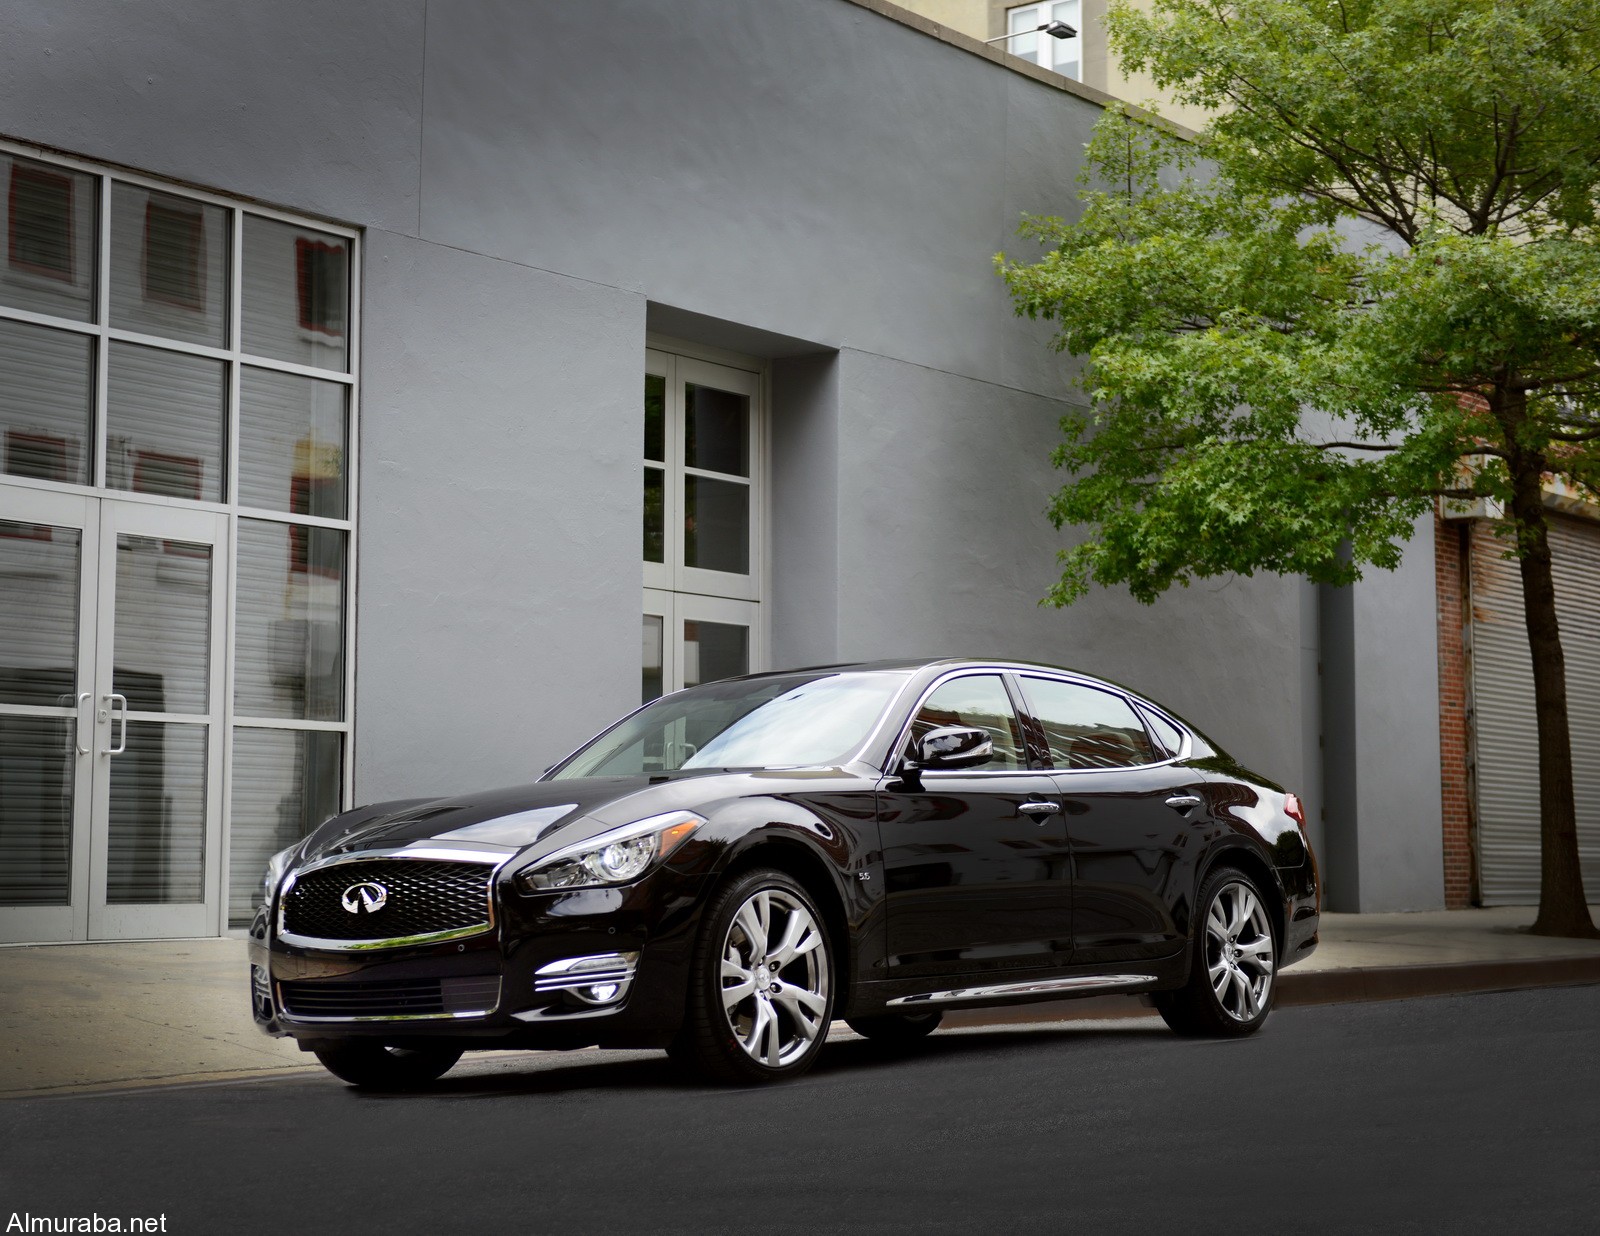 The 2016 Infiniti Q70L has much to offer over the standard Q70 performance luxury sedan Ð specifically a 5.9-inch longer wheelbase, 5.6 inches of additional rear seat legroom (41.8 inches total) and 5.9 inches of extra knee room (32.5 inches total). Along with its first class-style space, the Q70L is designed to provide smooth, luxurious ride comfort for all seating positions.